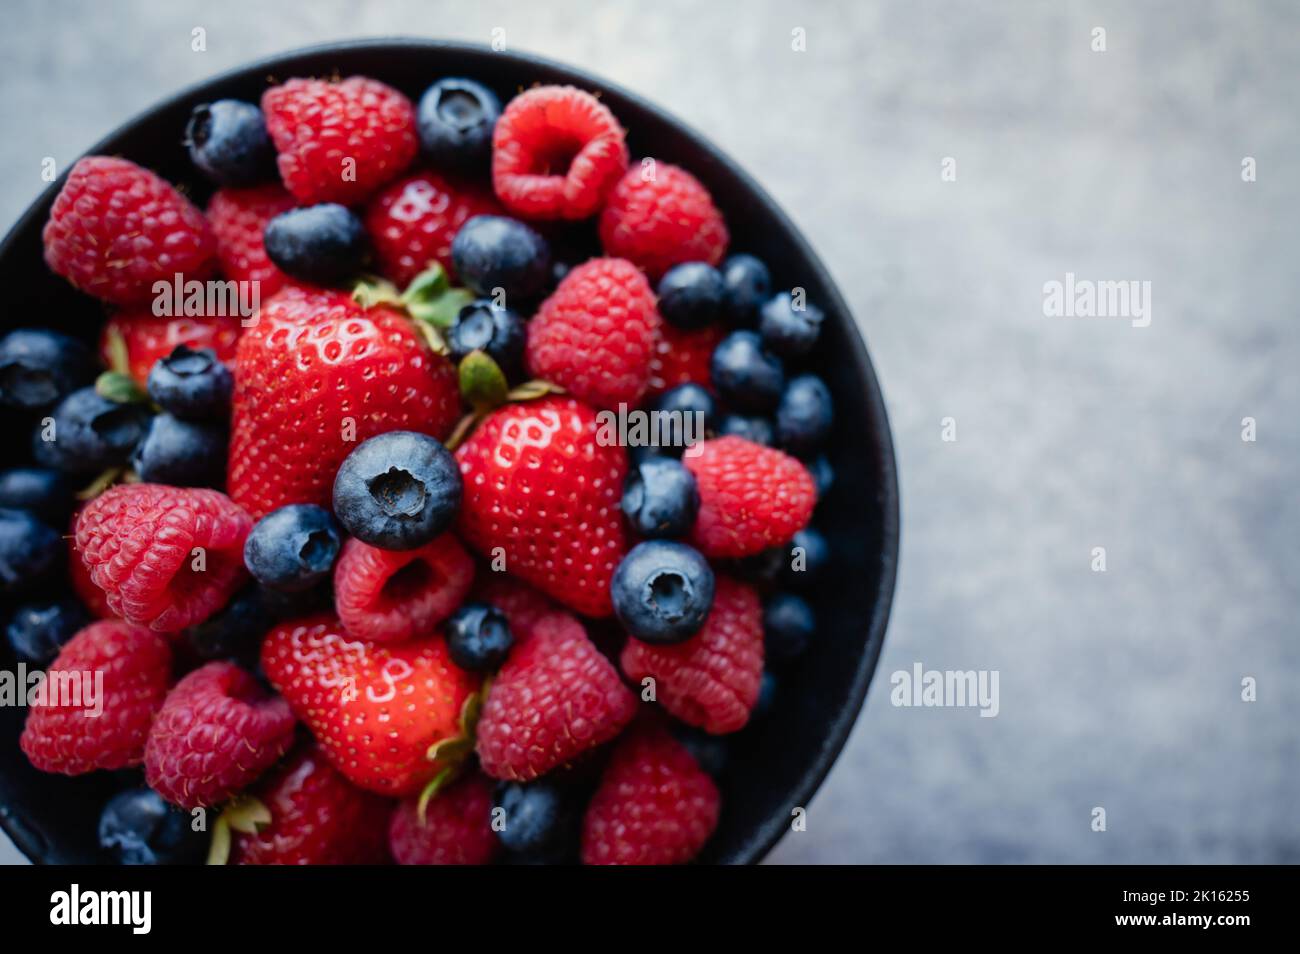 Overhead of bowl of fresh mixed berries on grey background. Stock Photo